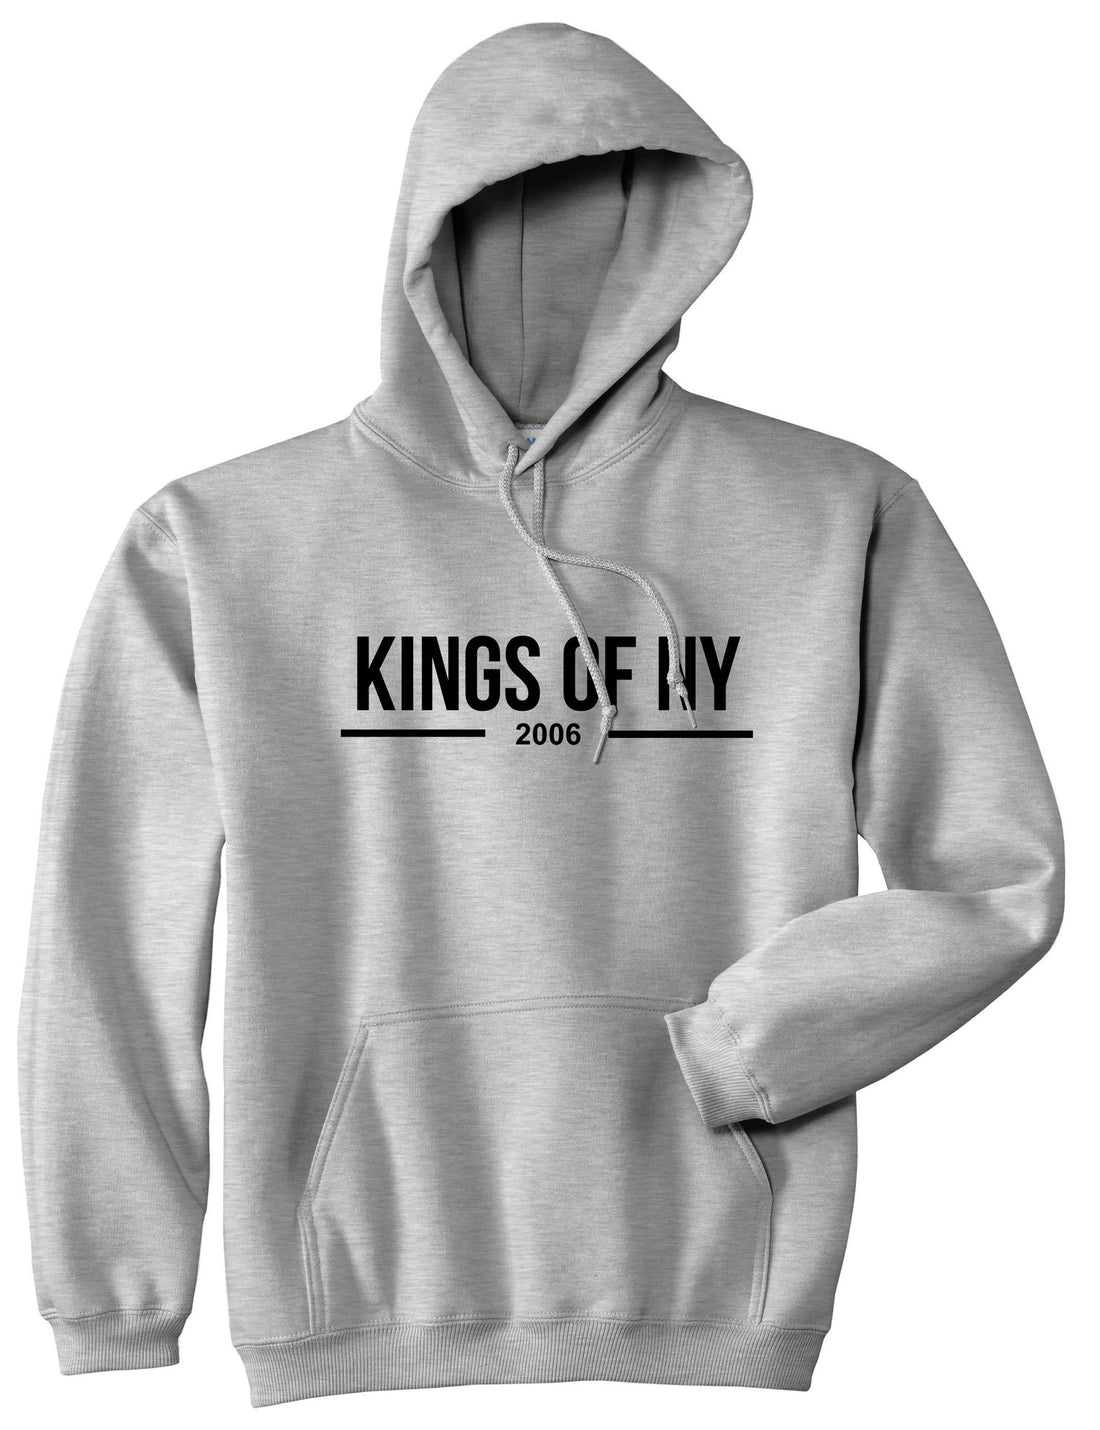 Kings Of NY 2006 Logo Lines Pullover Hoodie in Grey By Kings Of NY